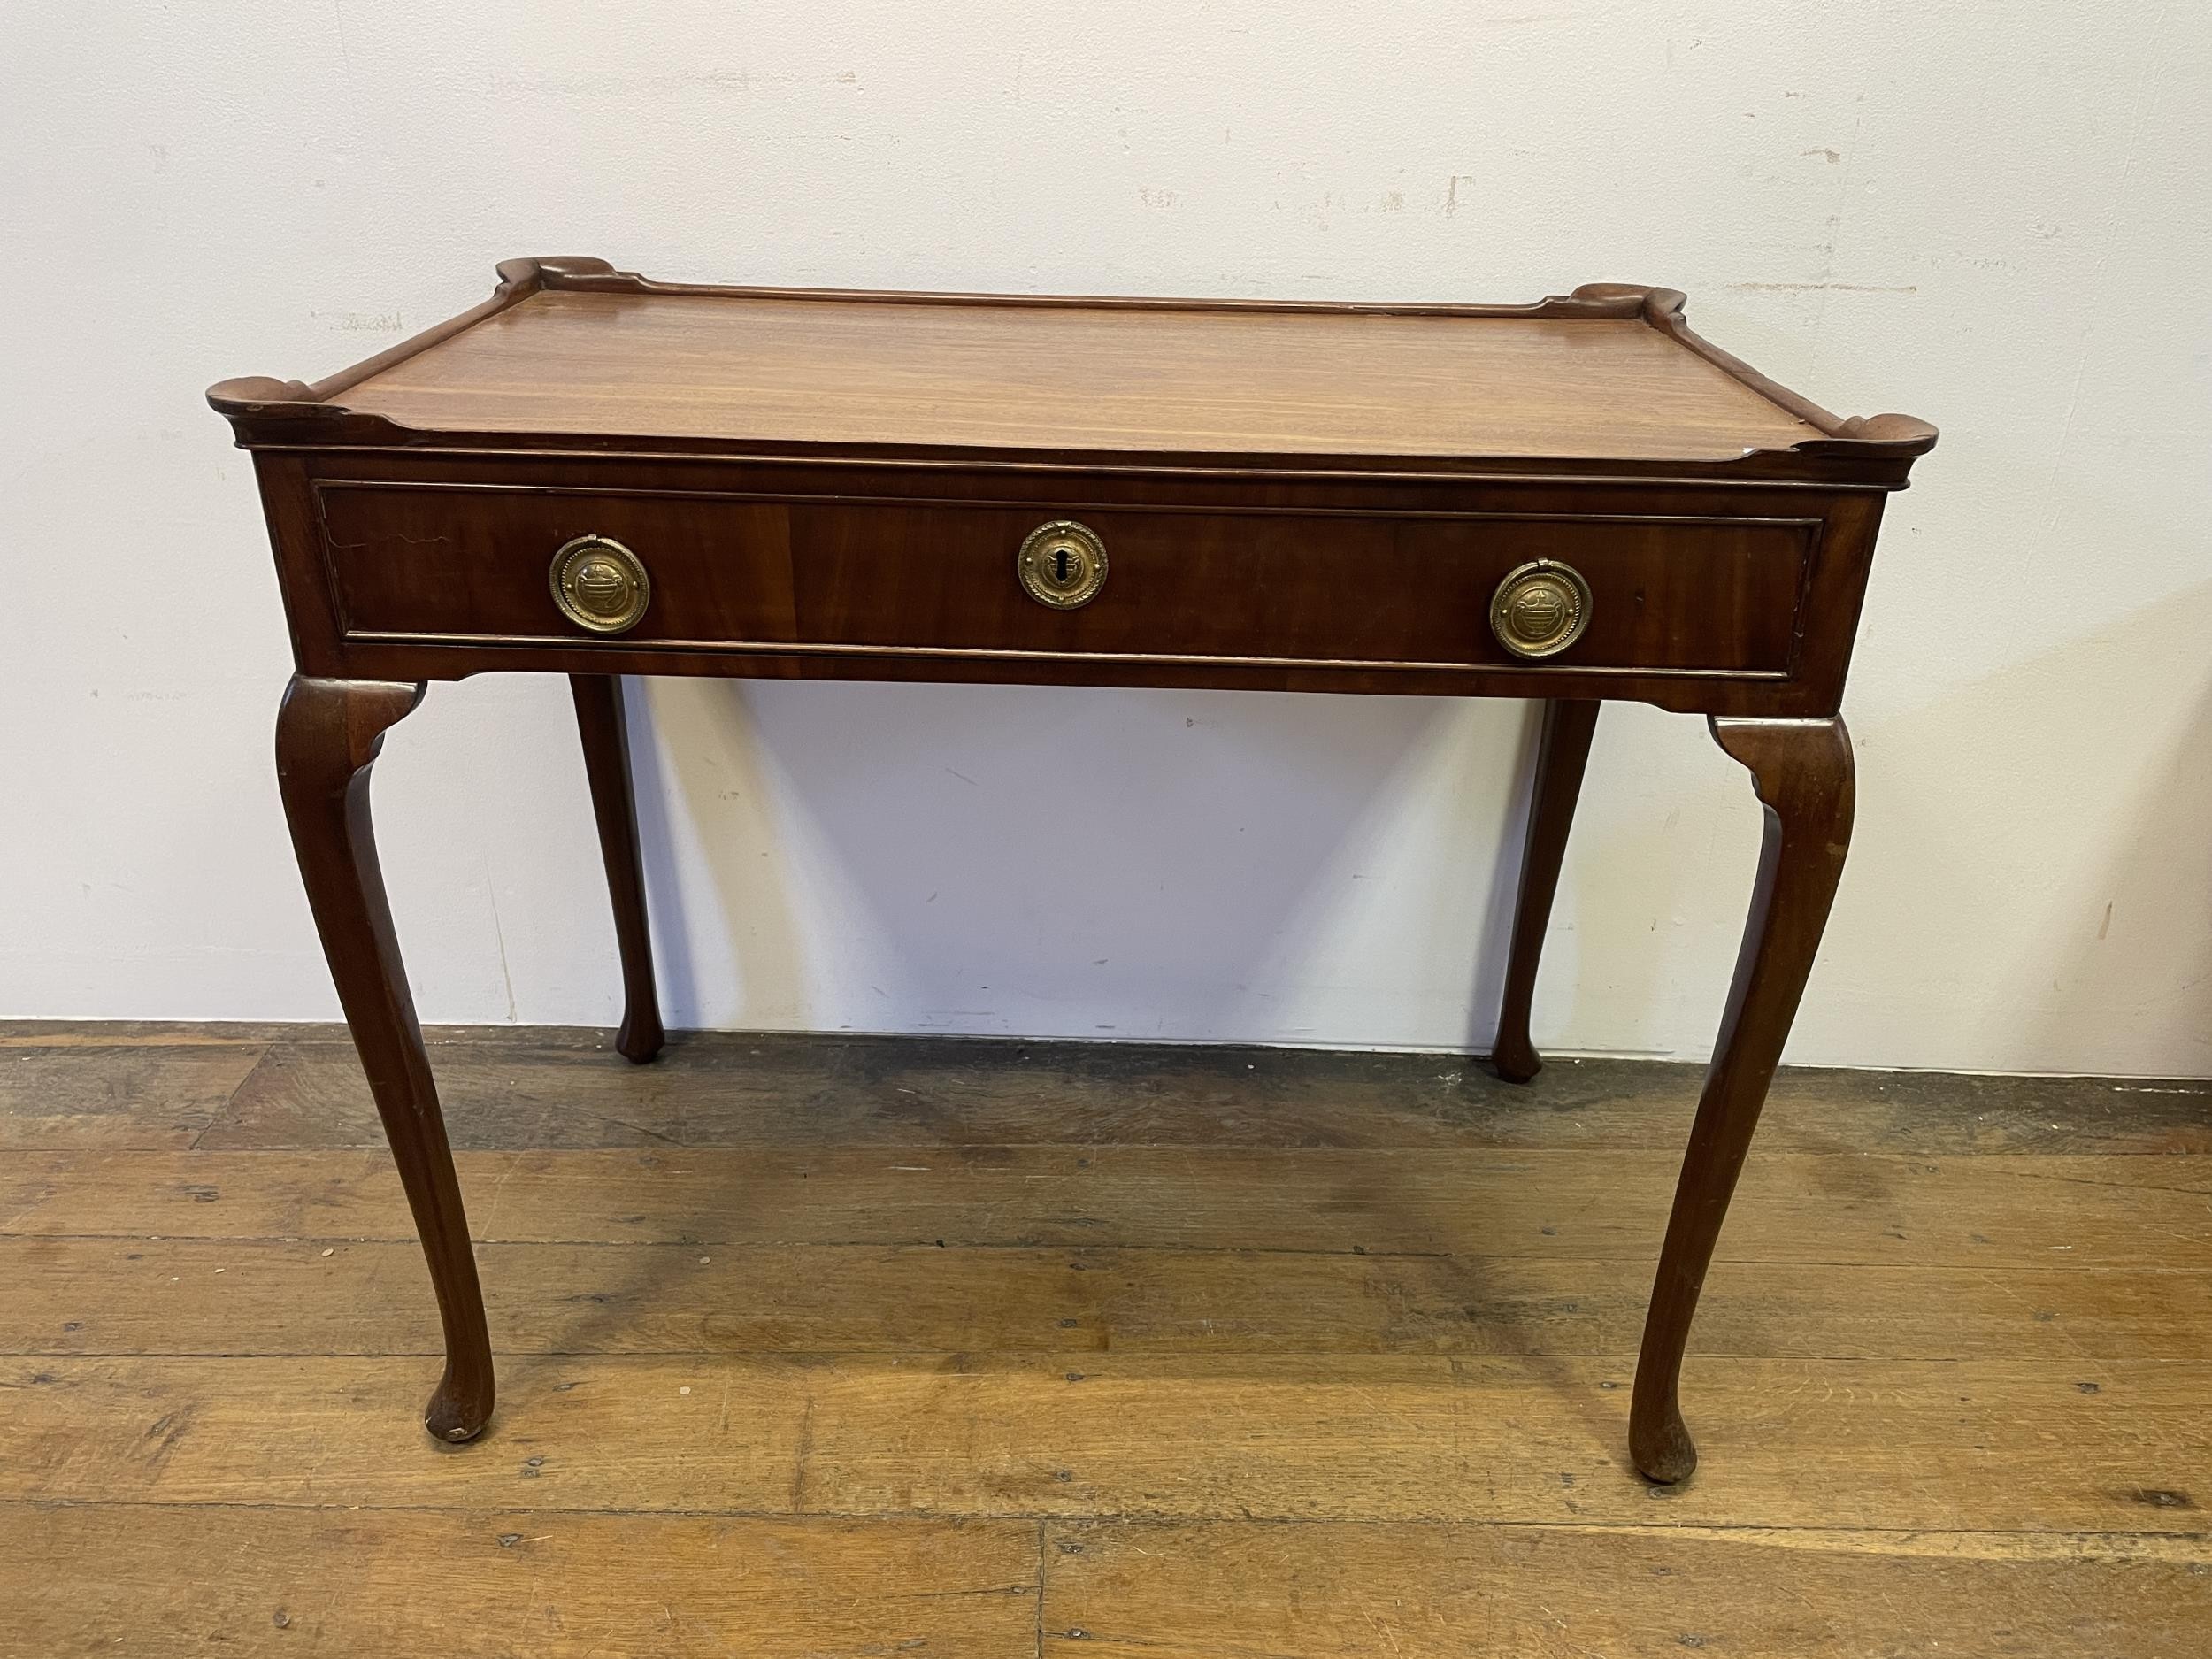 A Dutch mahogany table, having a raised rim, with a single frieze drawer on cabriole legs and pad